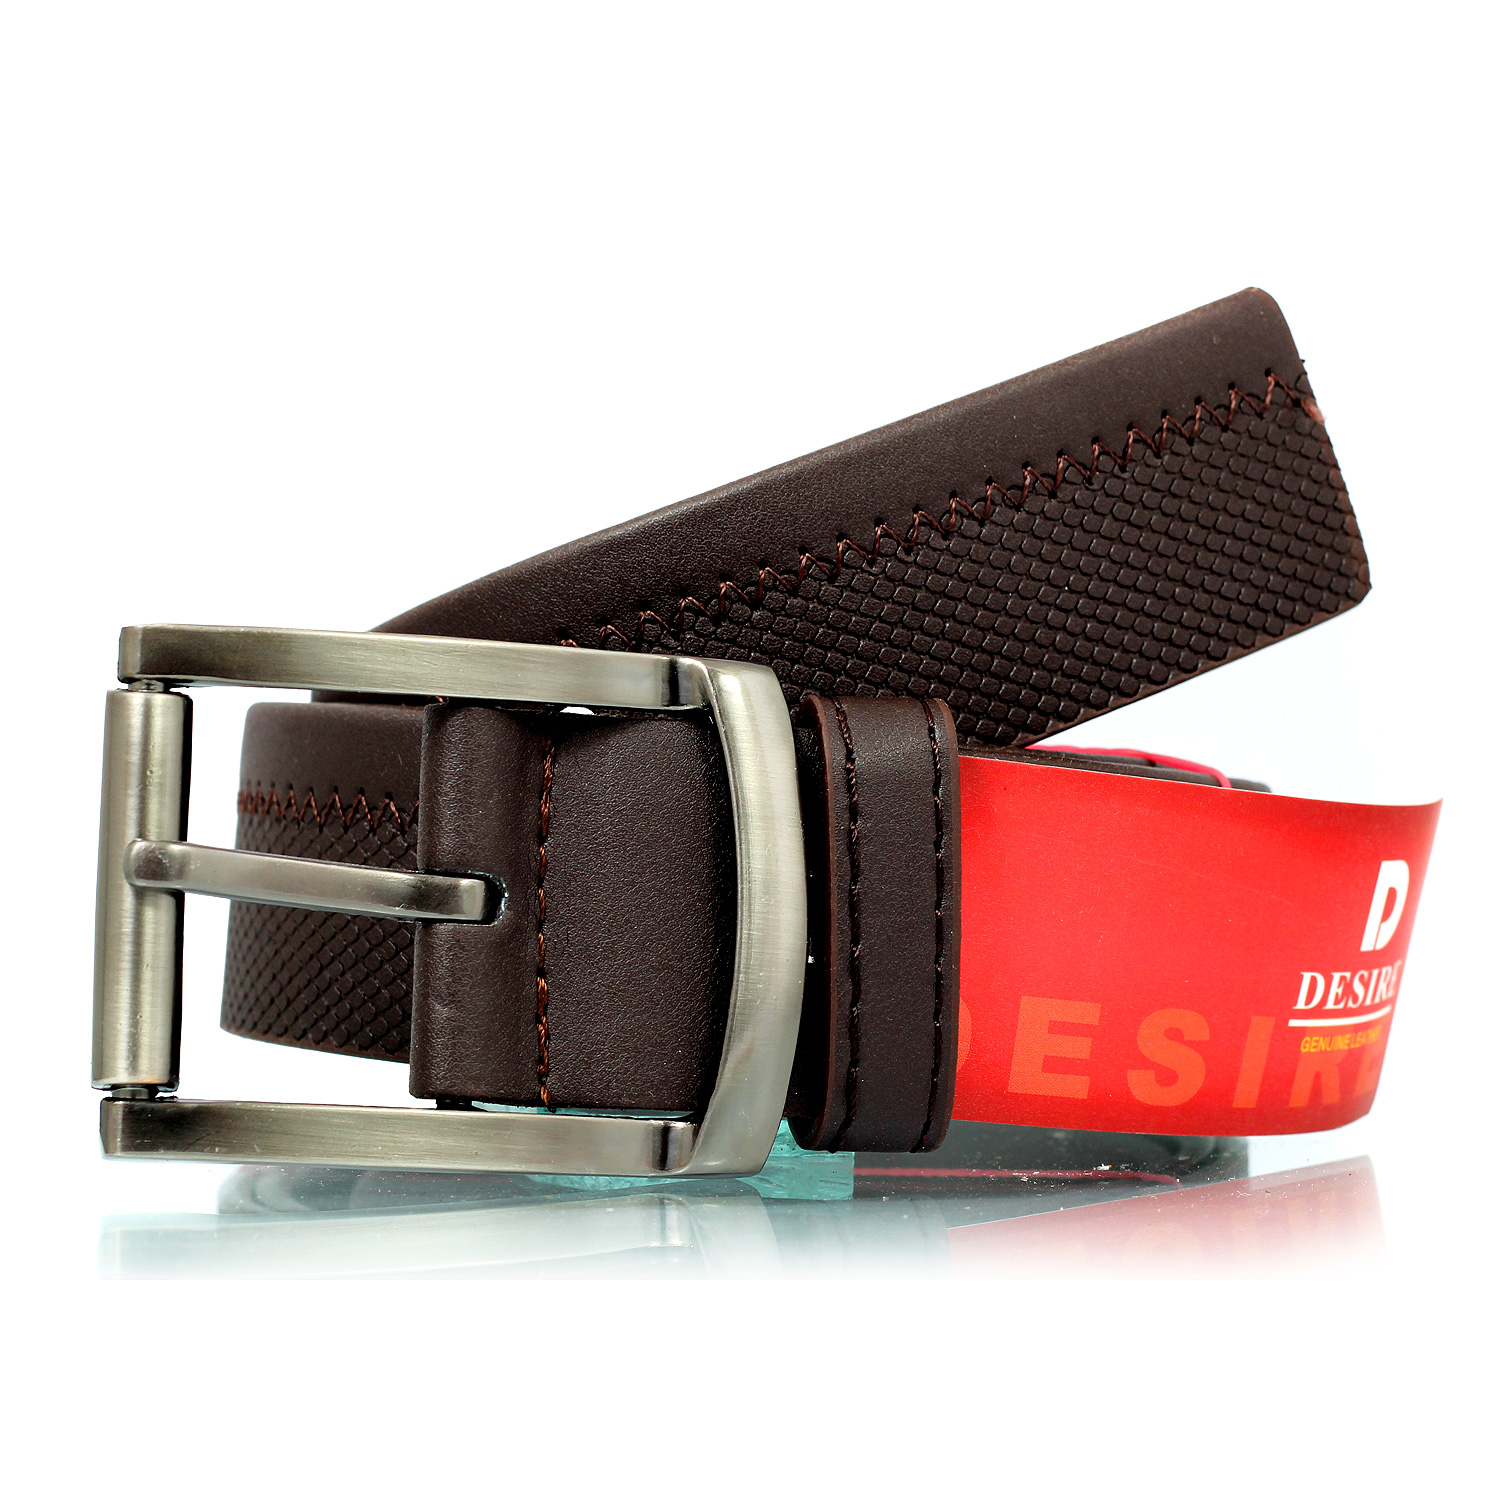 Metallic pin buckle with double textured hand stitched leather belt